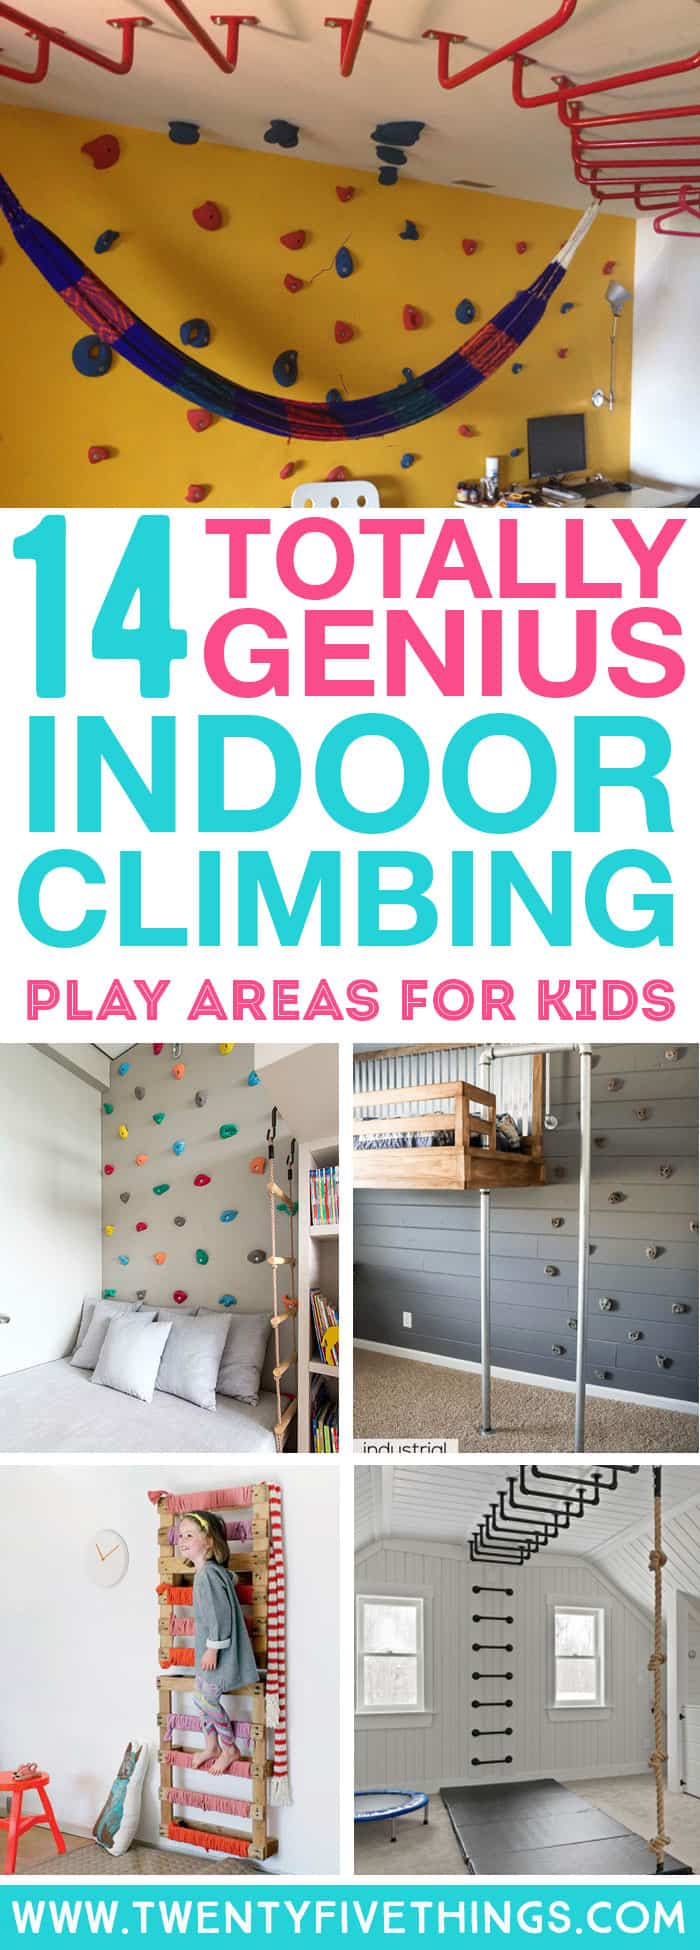 These are really good ideas for making an indoor climbing space for my kids. Some are a little more challenging, but a lot of these ideas are actually totally doable and have full instructions for making. Plus, the kids are always happier when they get some playtime on rainy days! #kidsactivities #DIY #indooractivities #play